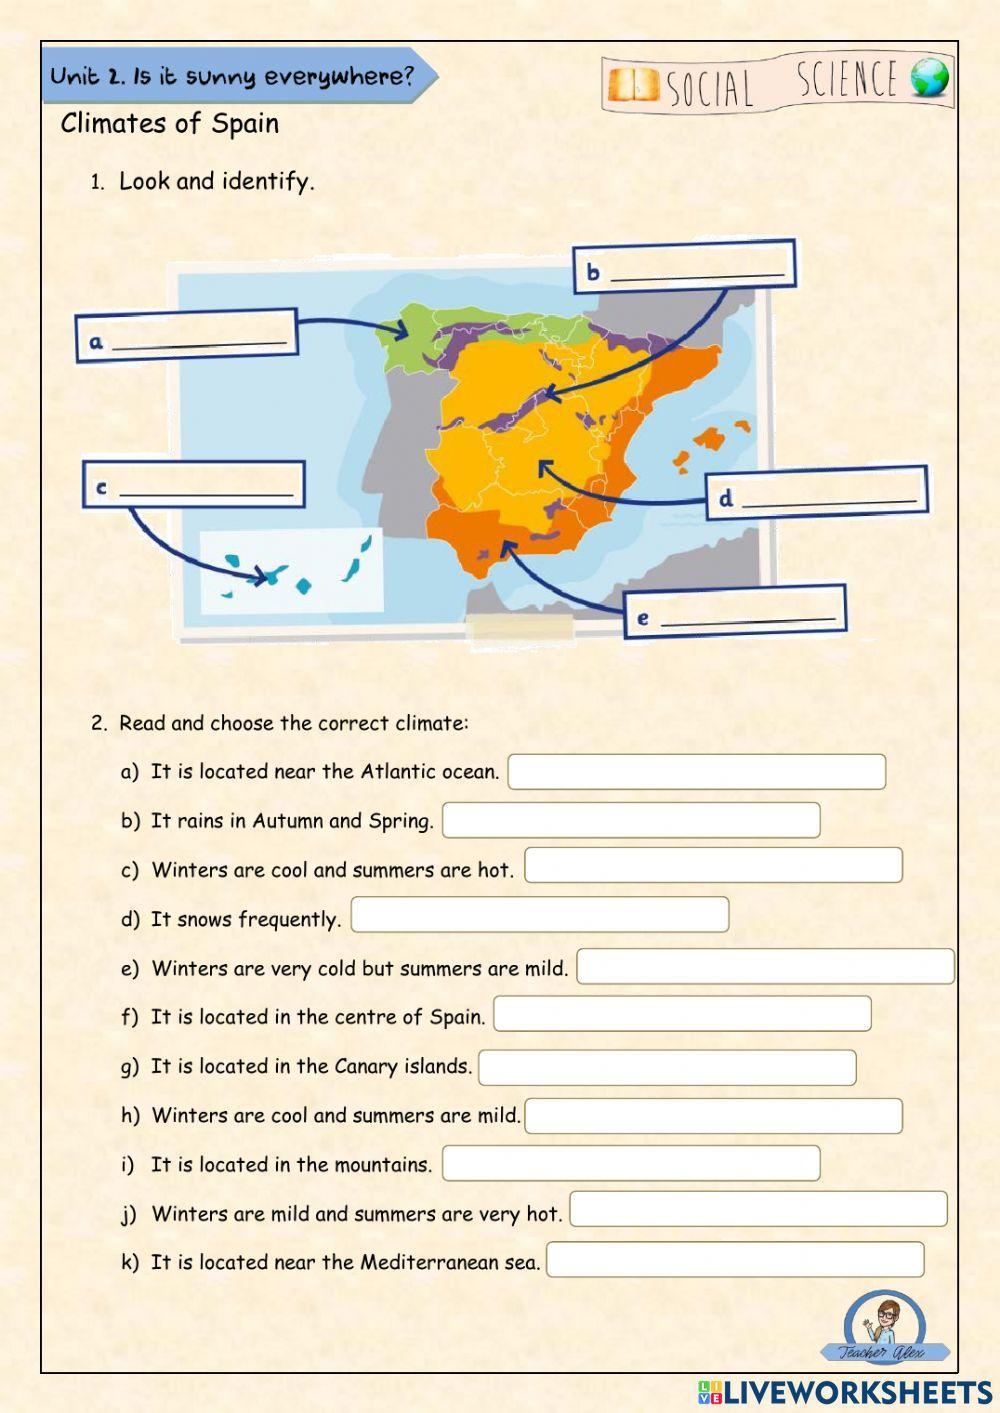 Climates of Spain | Live Worksheets